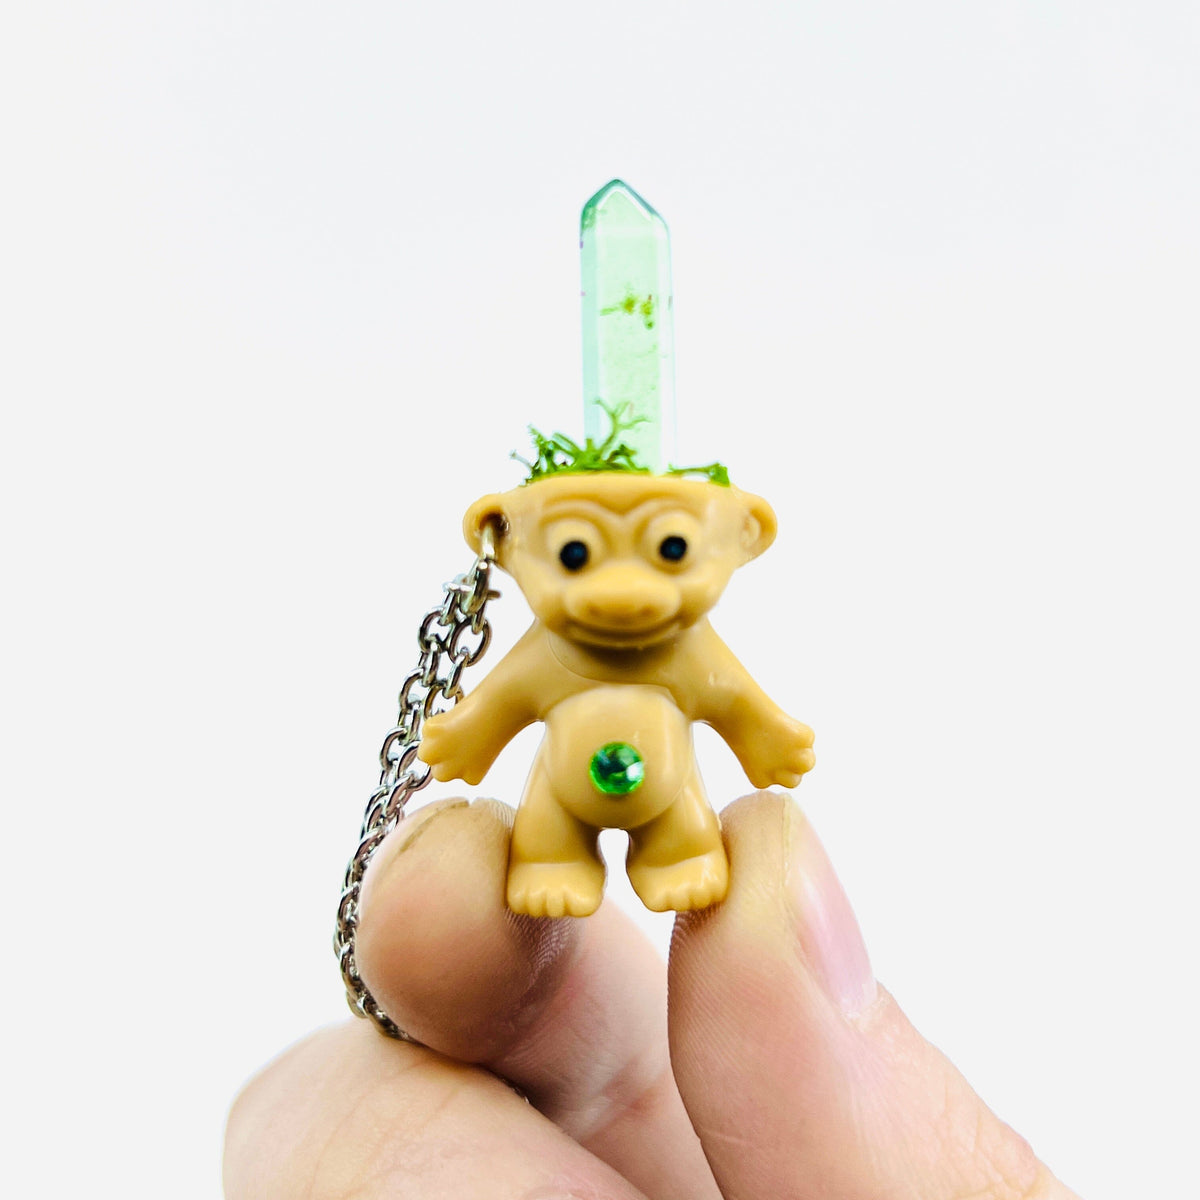 Crystal Troll Doll Necklace Jewelry - Green Agate 